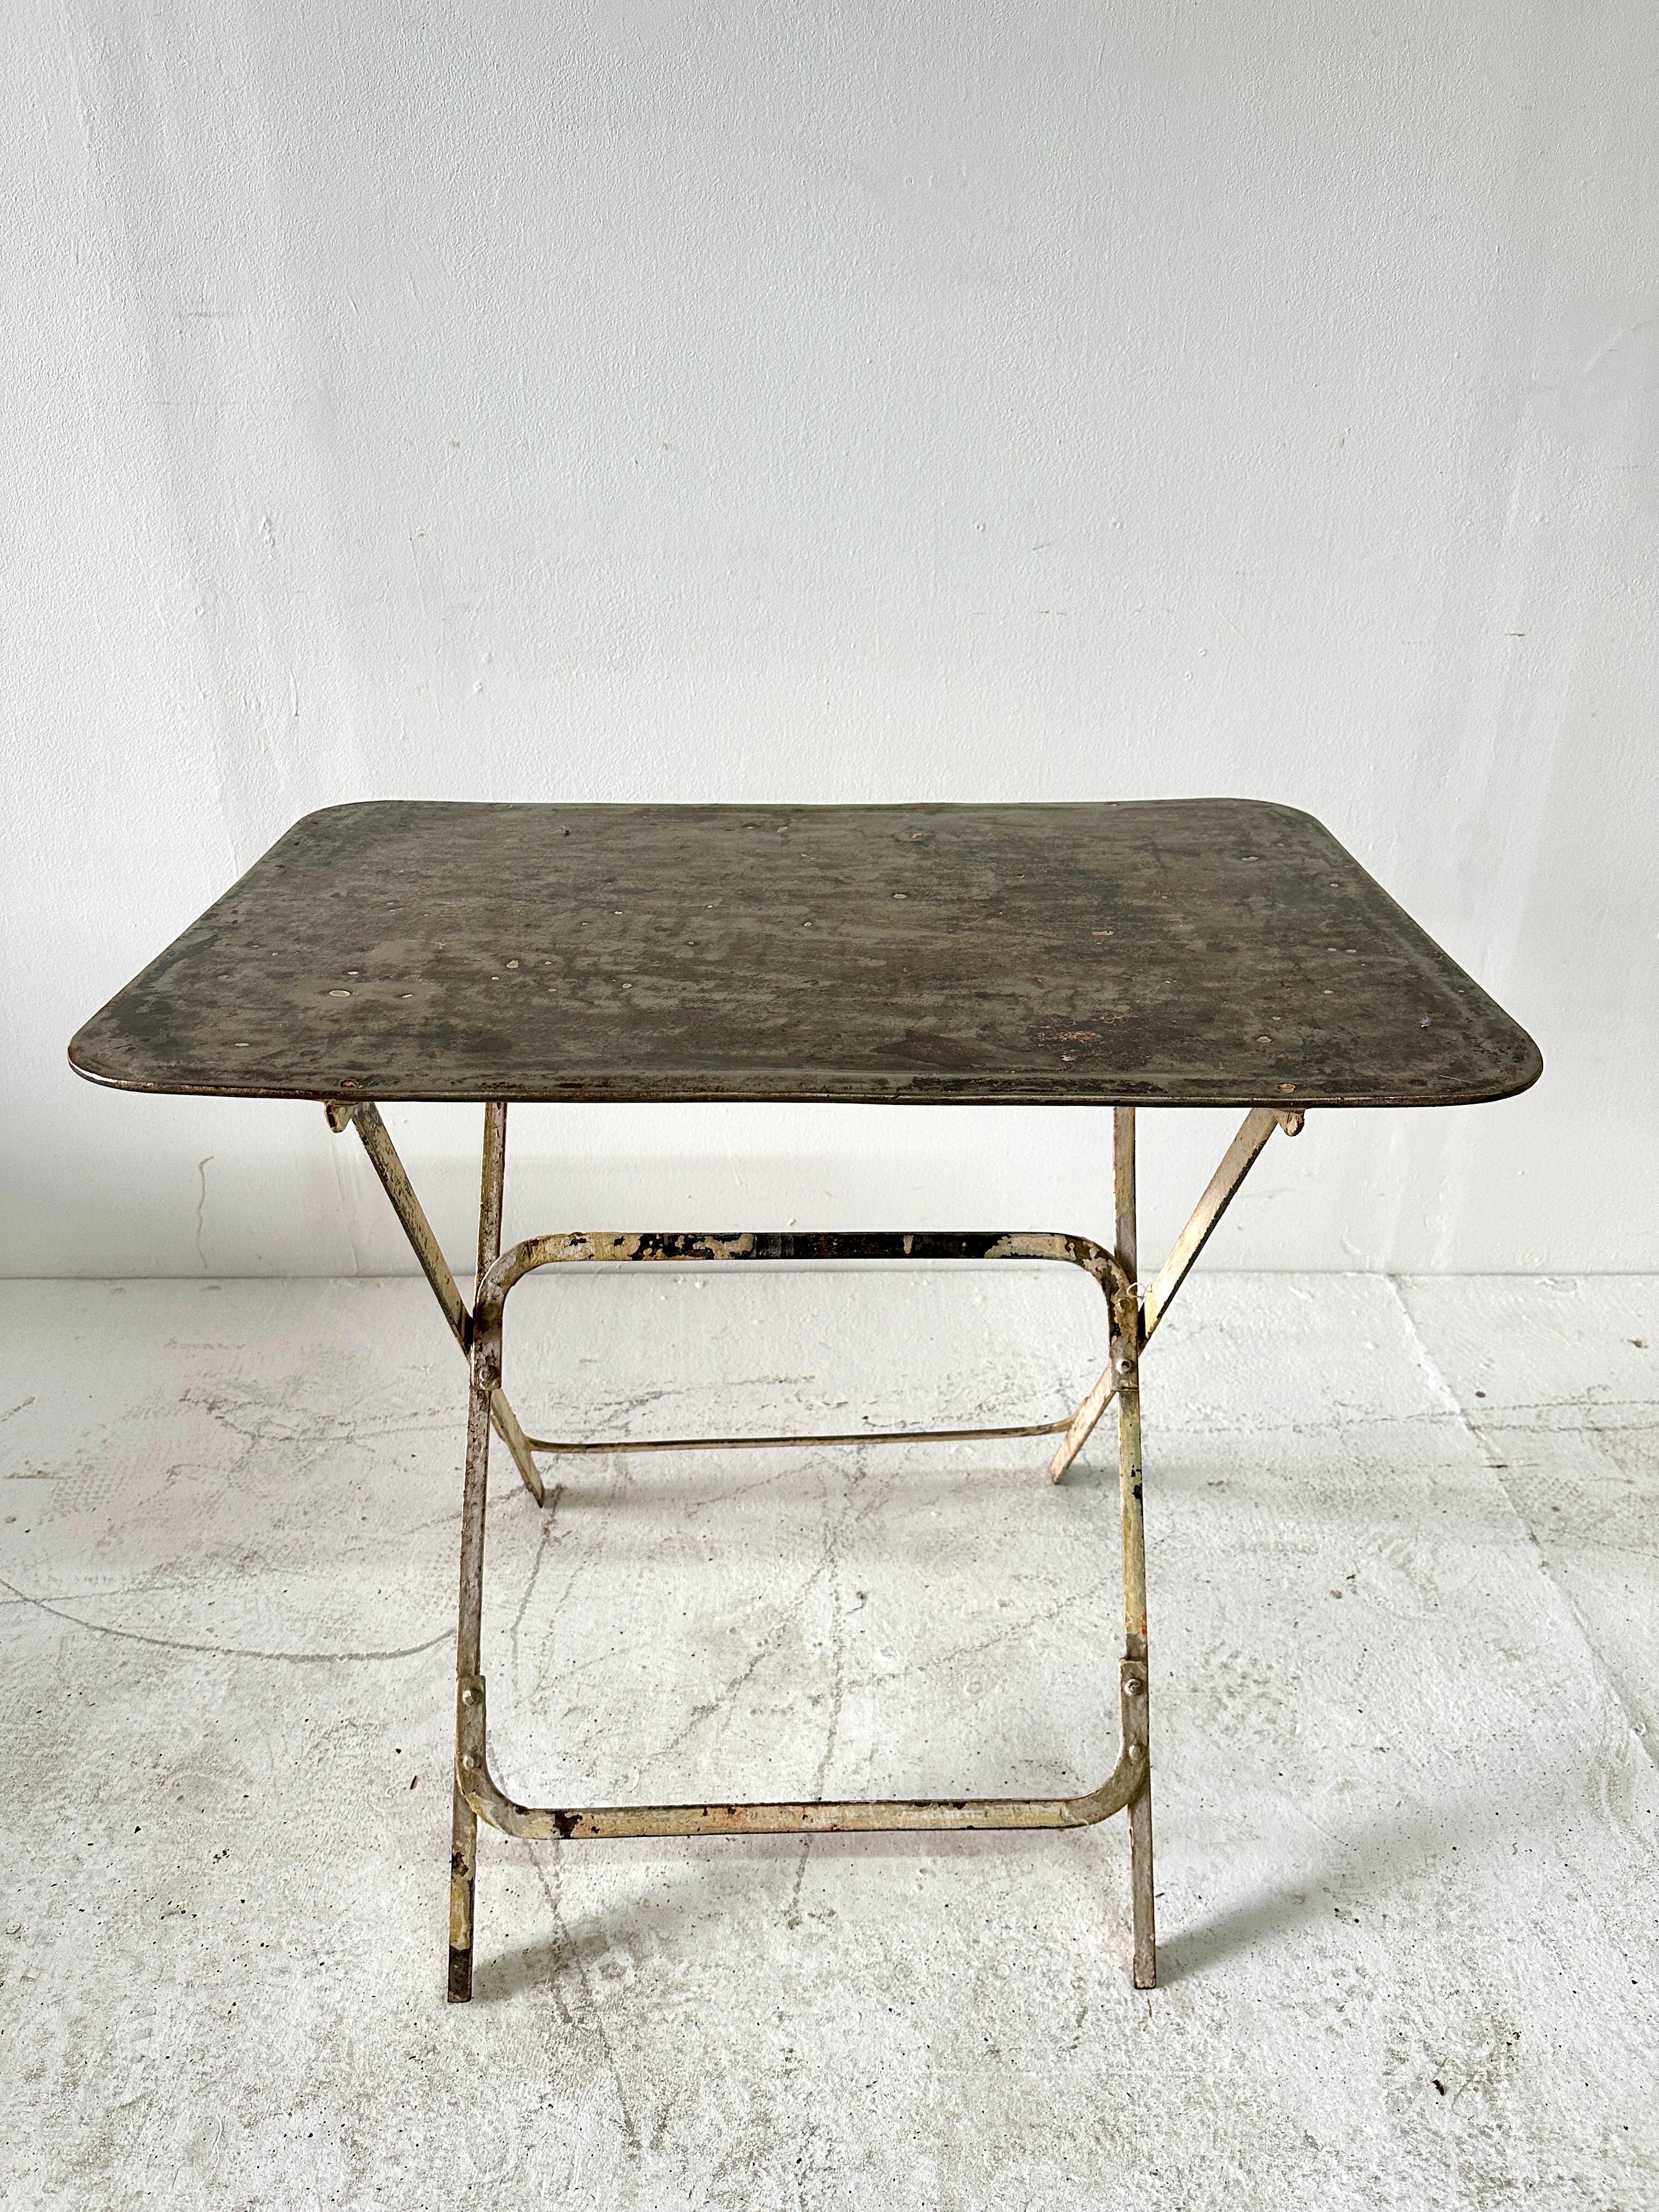 Vintage French Industrial & Distressed Metal Bistro Folding Table For Sale 5